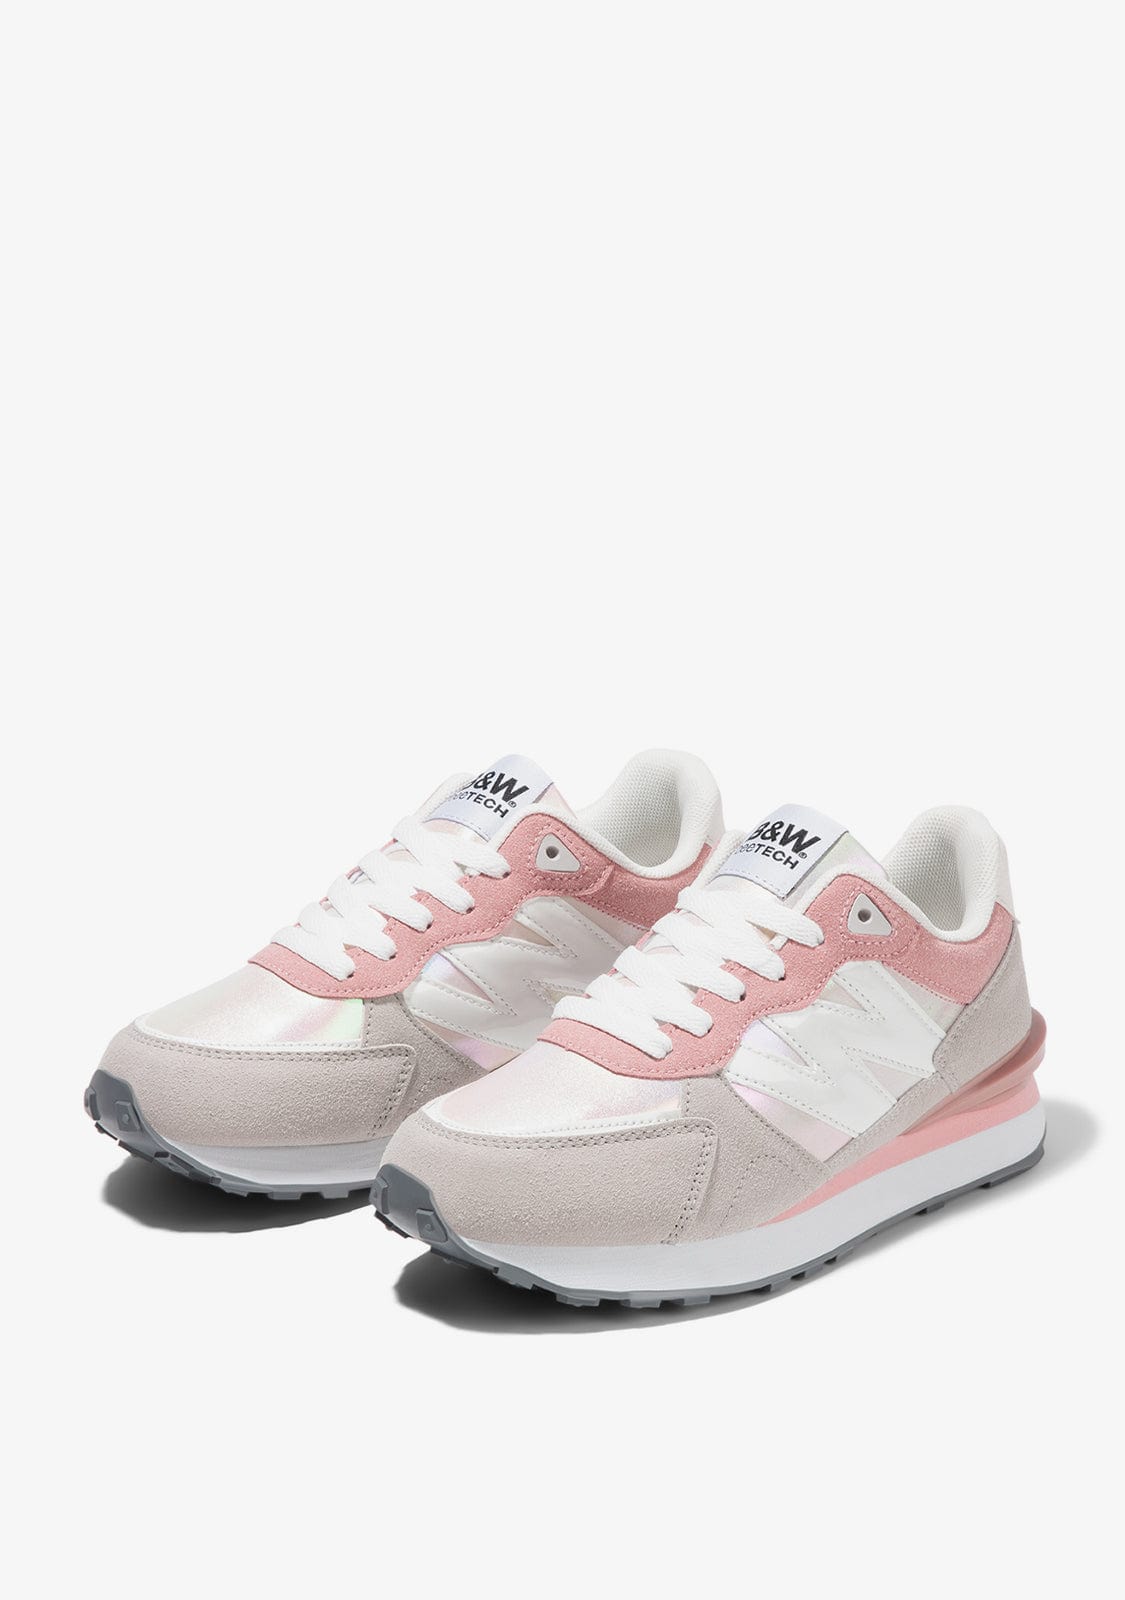 Grey/Pink Colorful Sneakers